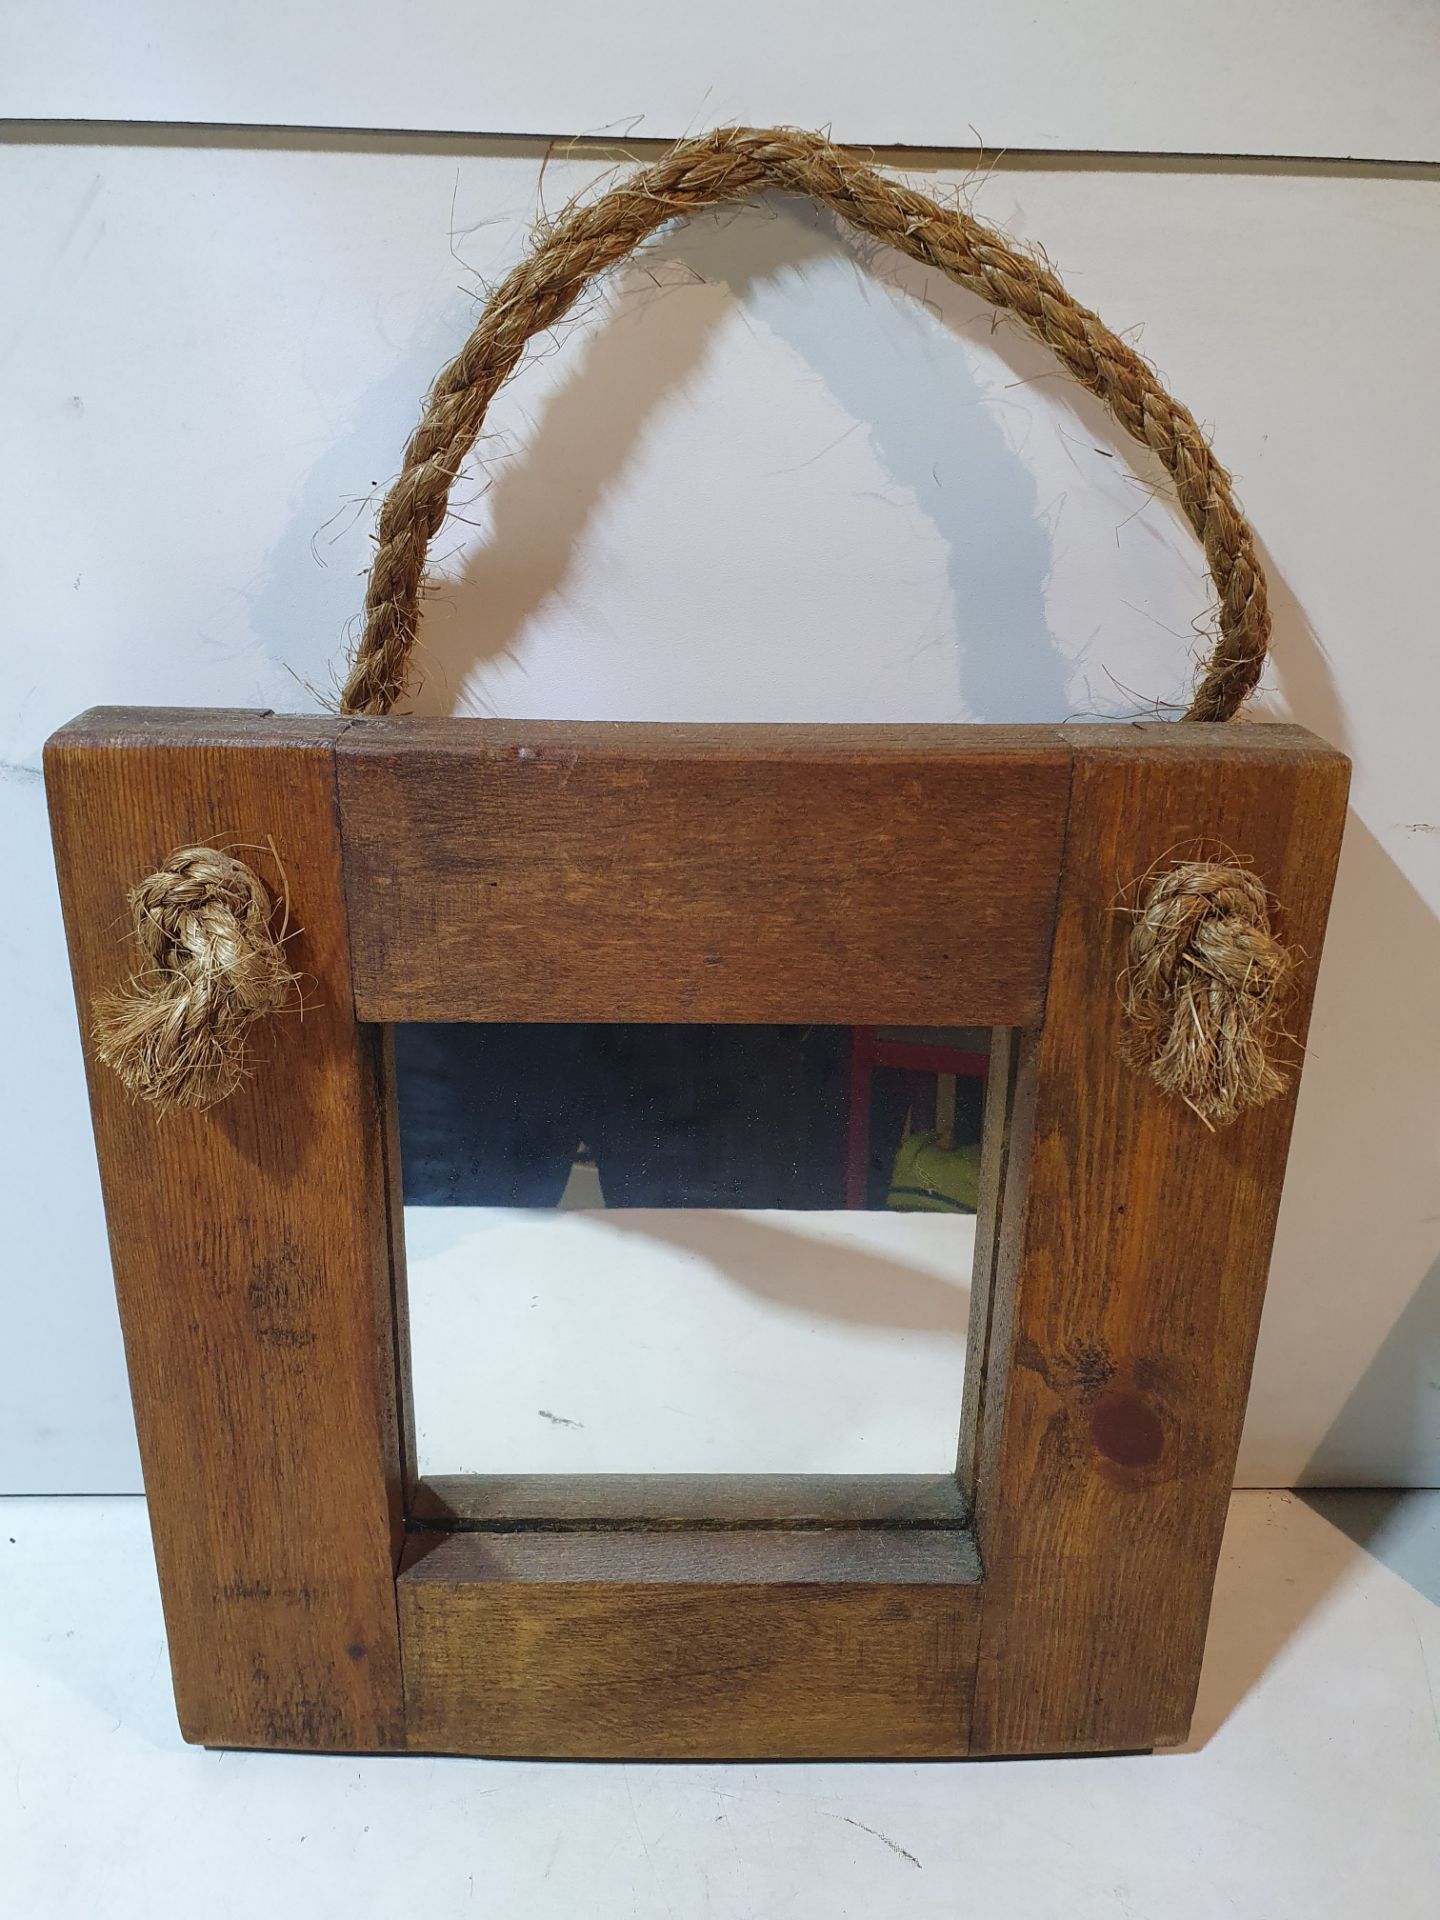 2 x Wooden Mirrors with Straw Hanging Straps - Image 2 of 5